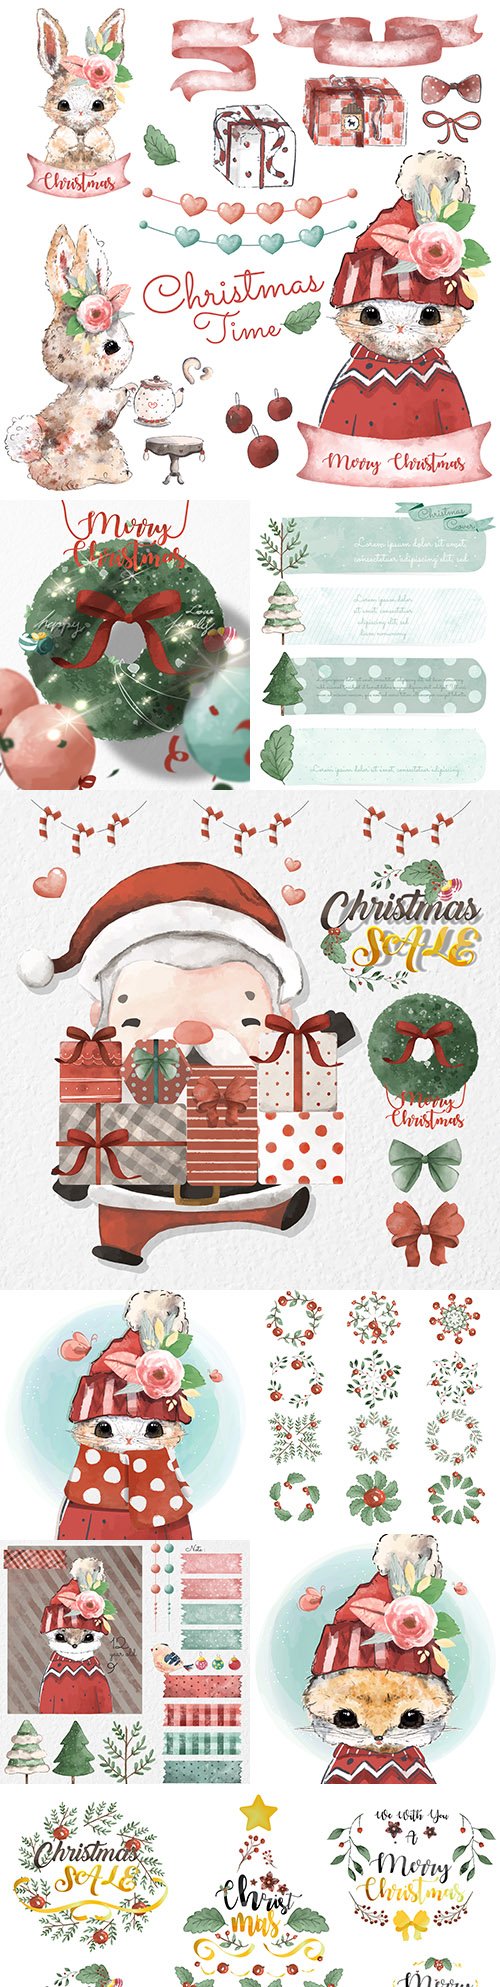 Christmas set of watercolor style design elements